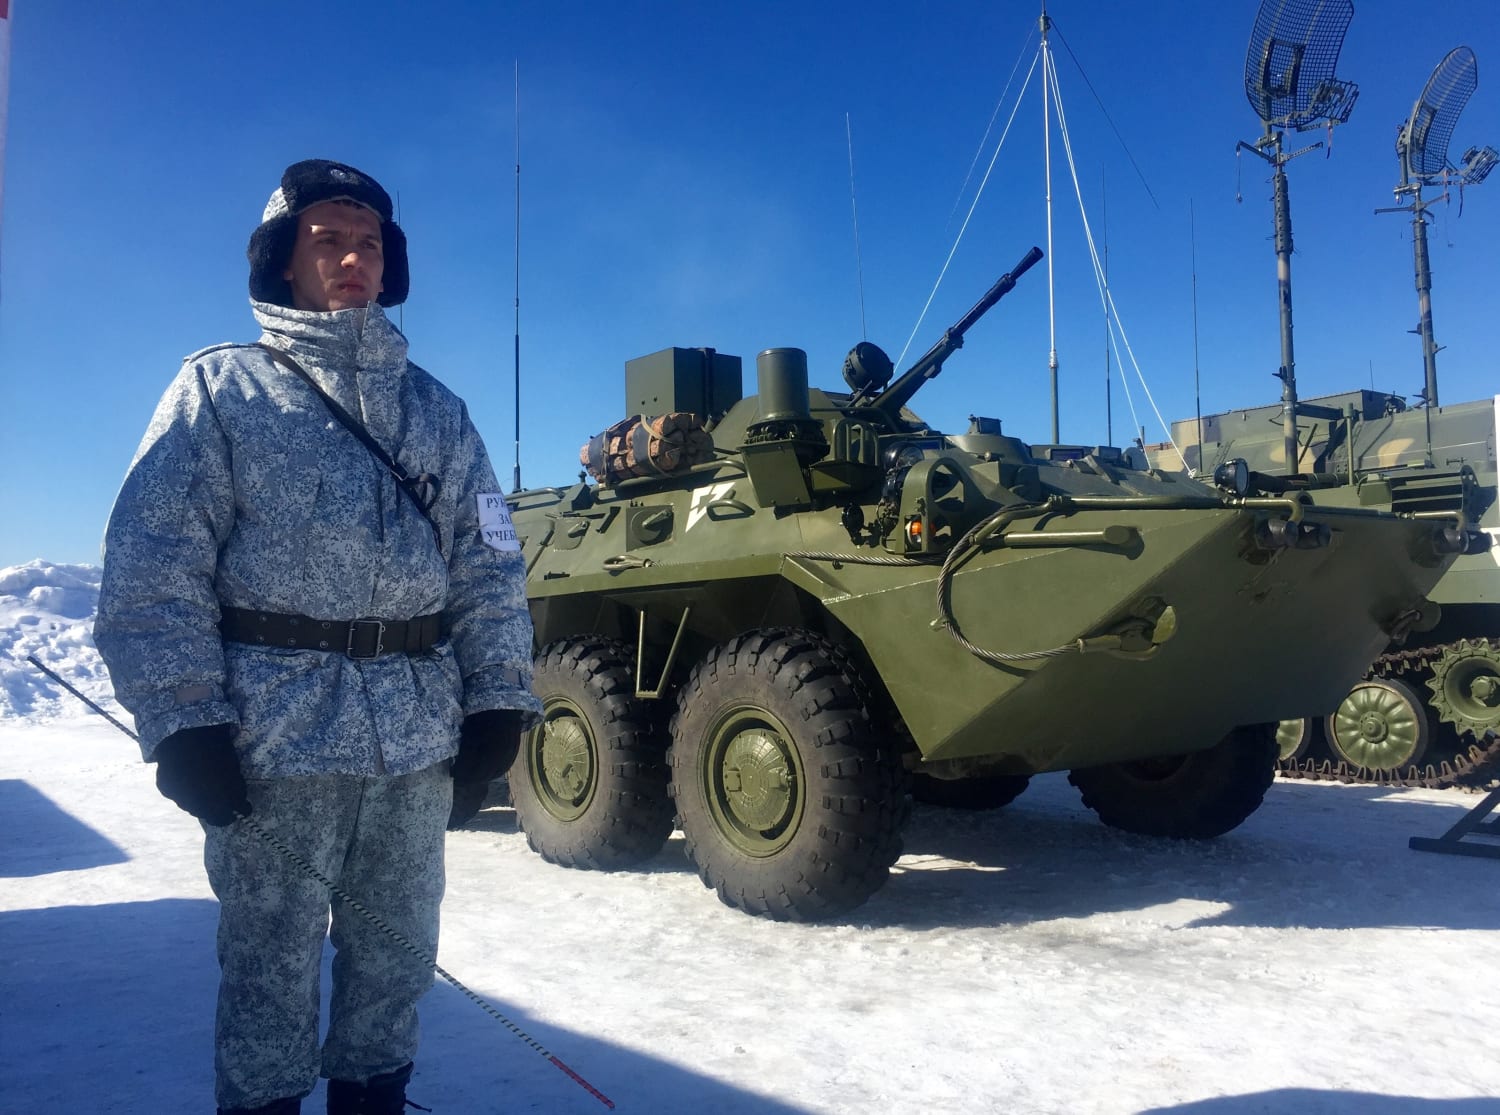 Russia's Military Buildup in Arctic Has U.S. Watching Closely